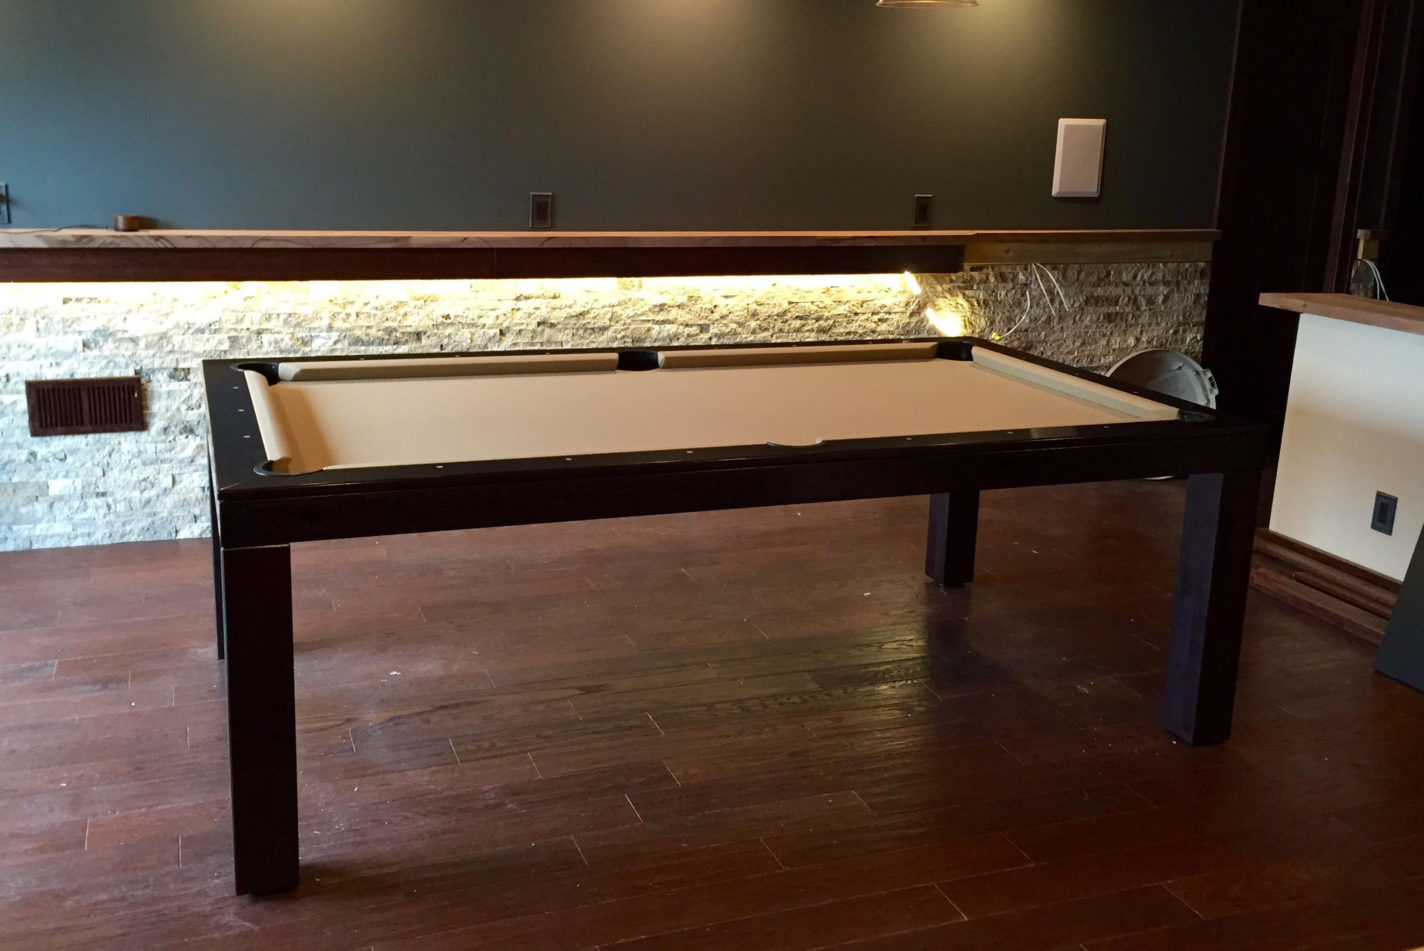 Vision Convertible Pool Table, Wisconsin